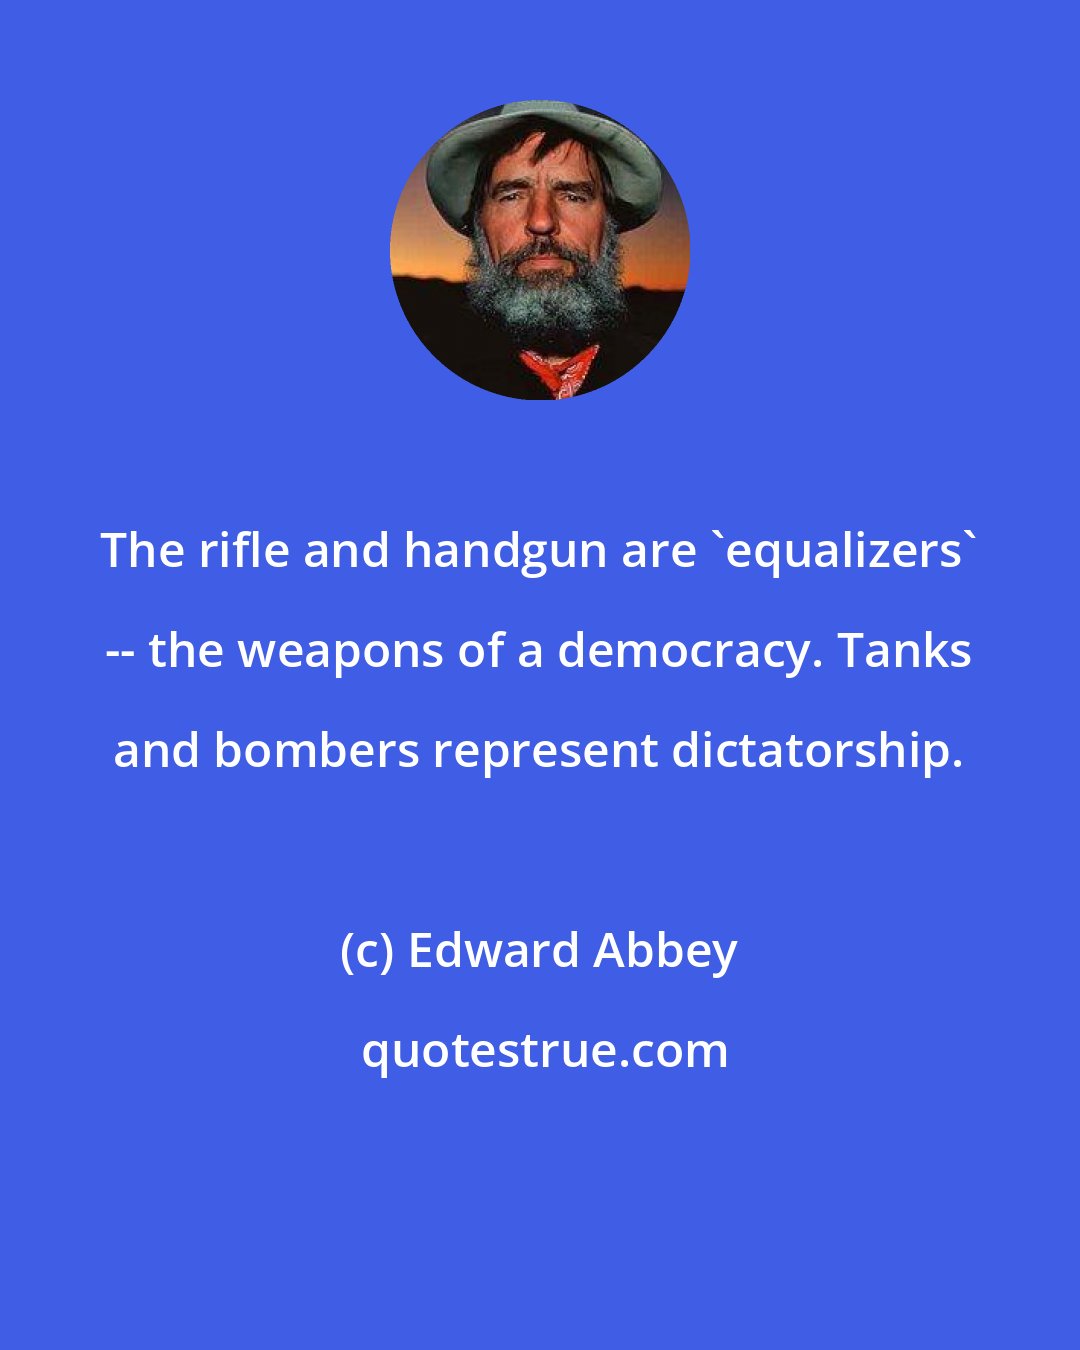 Edward Abbey: The rifle and handgun are 'equalizers' -- the weapons of a democracy. Tanks and bombers represent dictatorship.